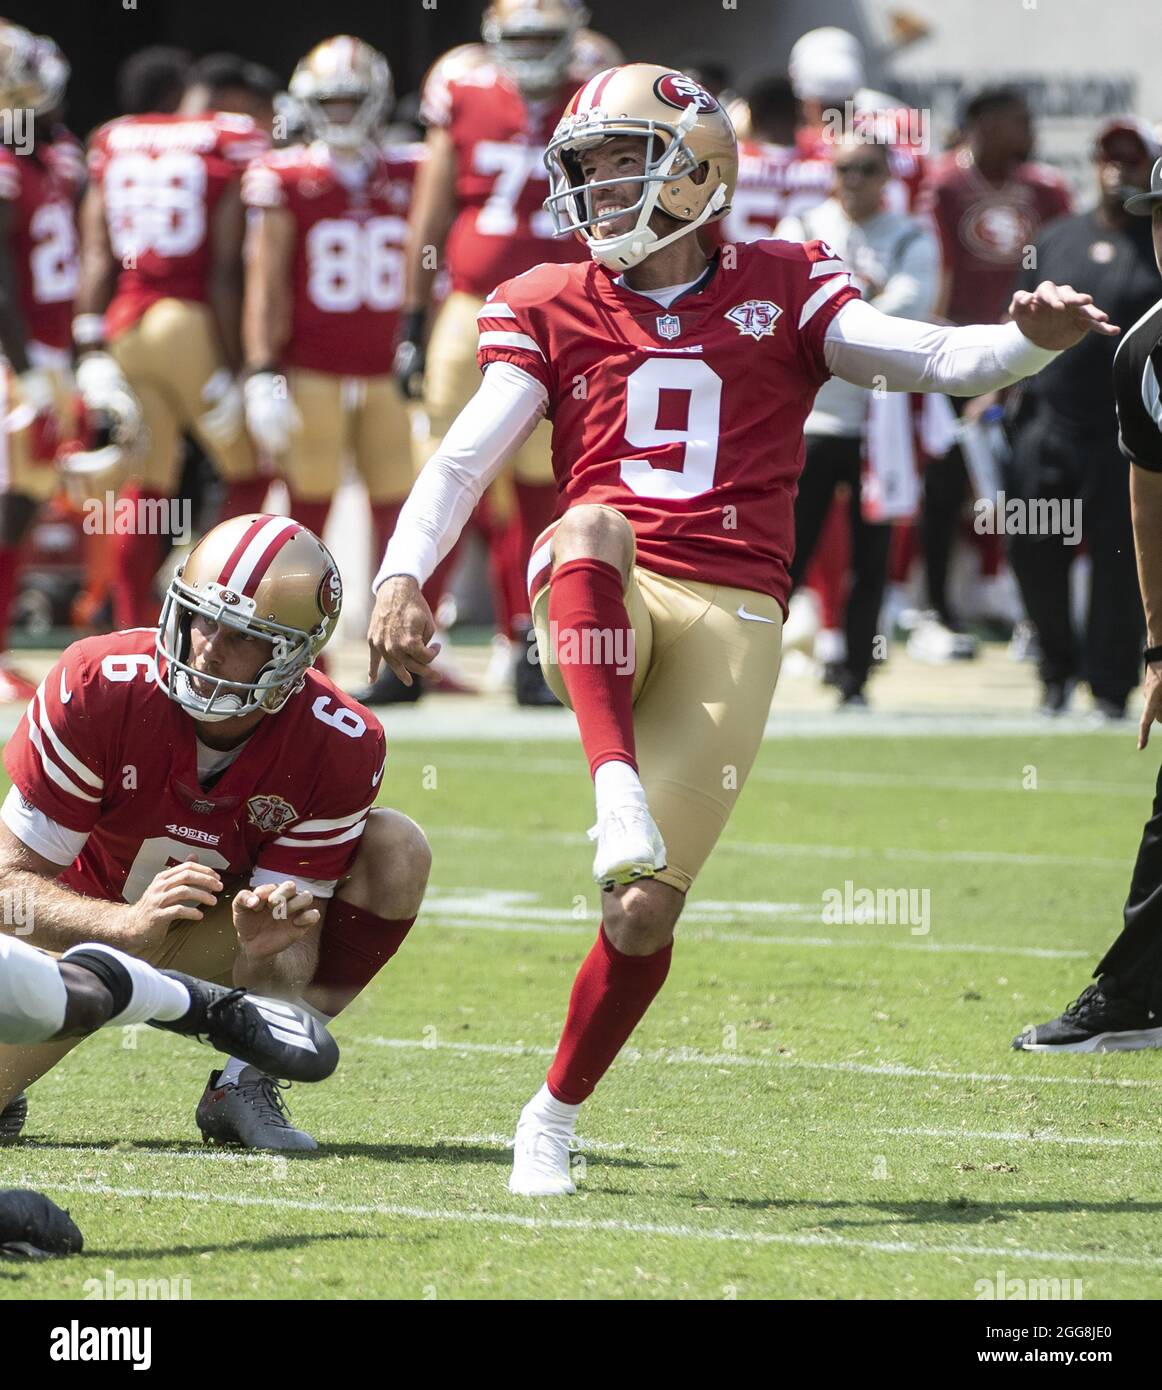 Santa Clara, United States. 29th Aug, 2021. San Francisco 49ers kicker Robbie Gould (9) watches his 21 yard field goal from the hold of Mitch Wishnowsky (6) against the Las Vegas Raiders at Levi's Stadium in Santa Clara, Califiornia on Sunday, August 29, 2021. Photo by Terry Schmitt/UPI Credit: UPI/Alamy Live News Stock Photo